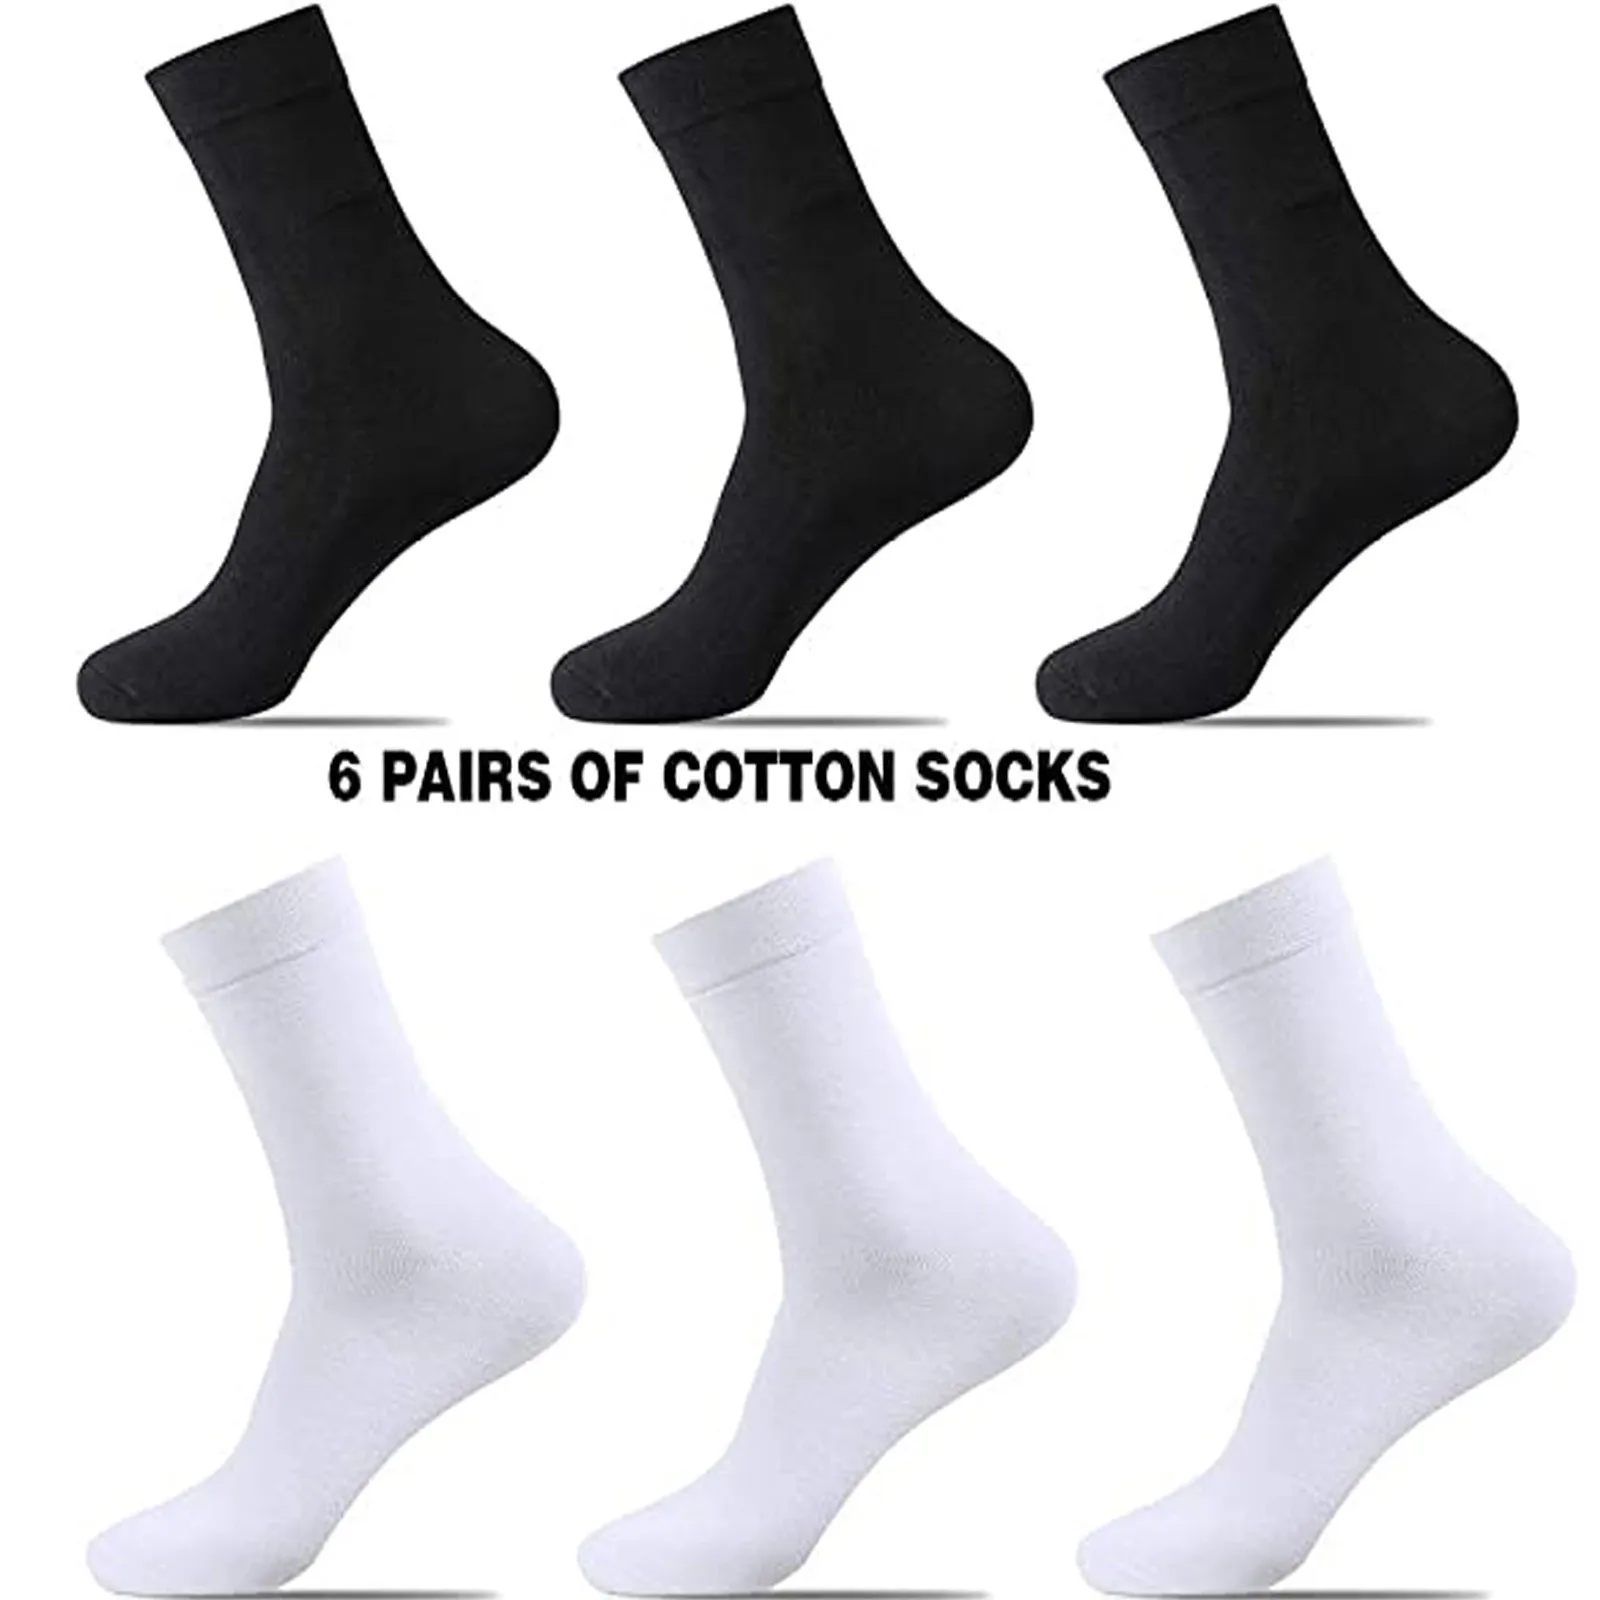 

6 Pairs/lot Socks Men Winter Warm Cotton Blend Comfortable Long Crew Casual Bohemian Sock Male Gift For Husband Father 2 Styles